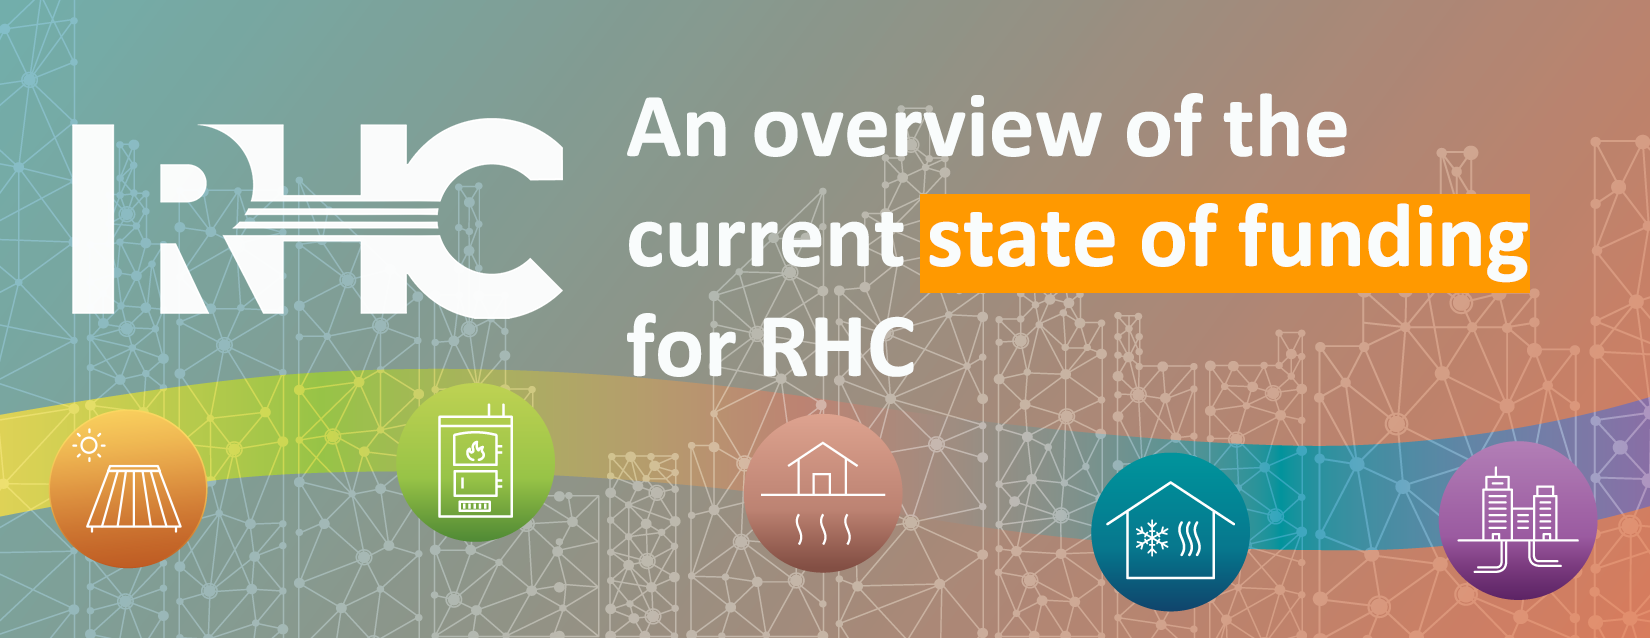 RHC ETIP Report on the financing strategy for the RHC sector